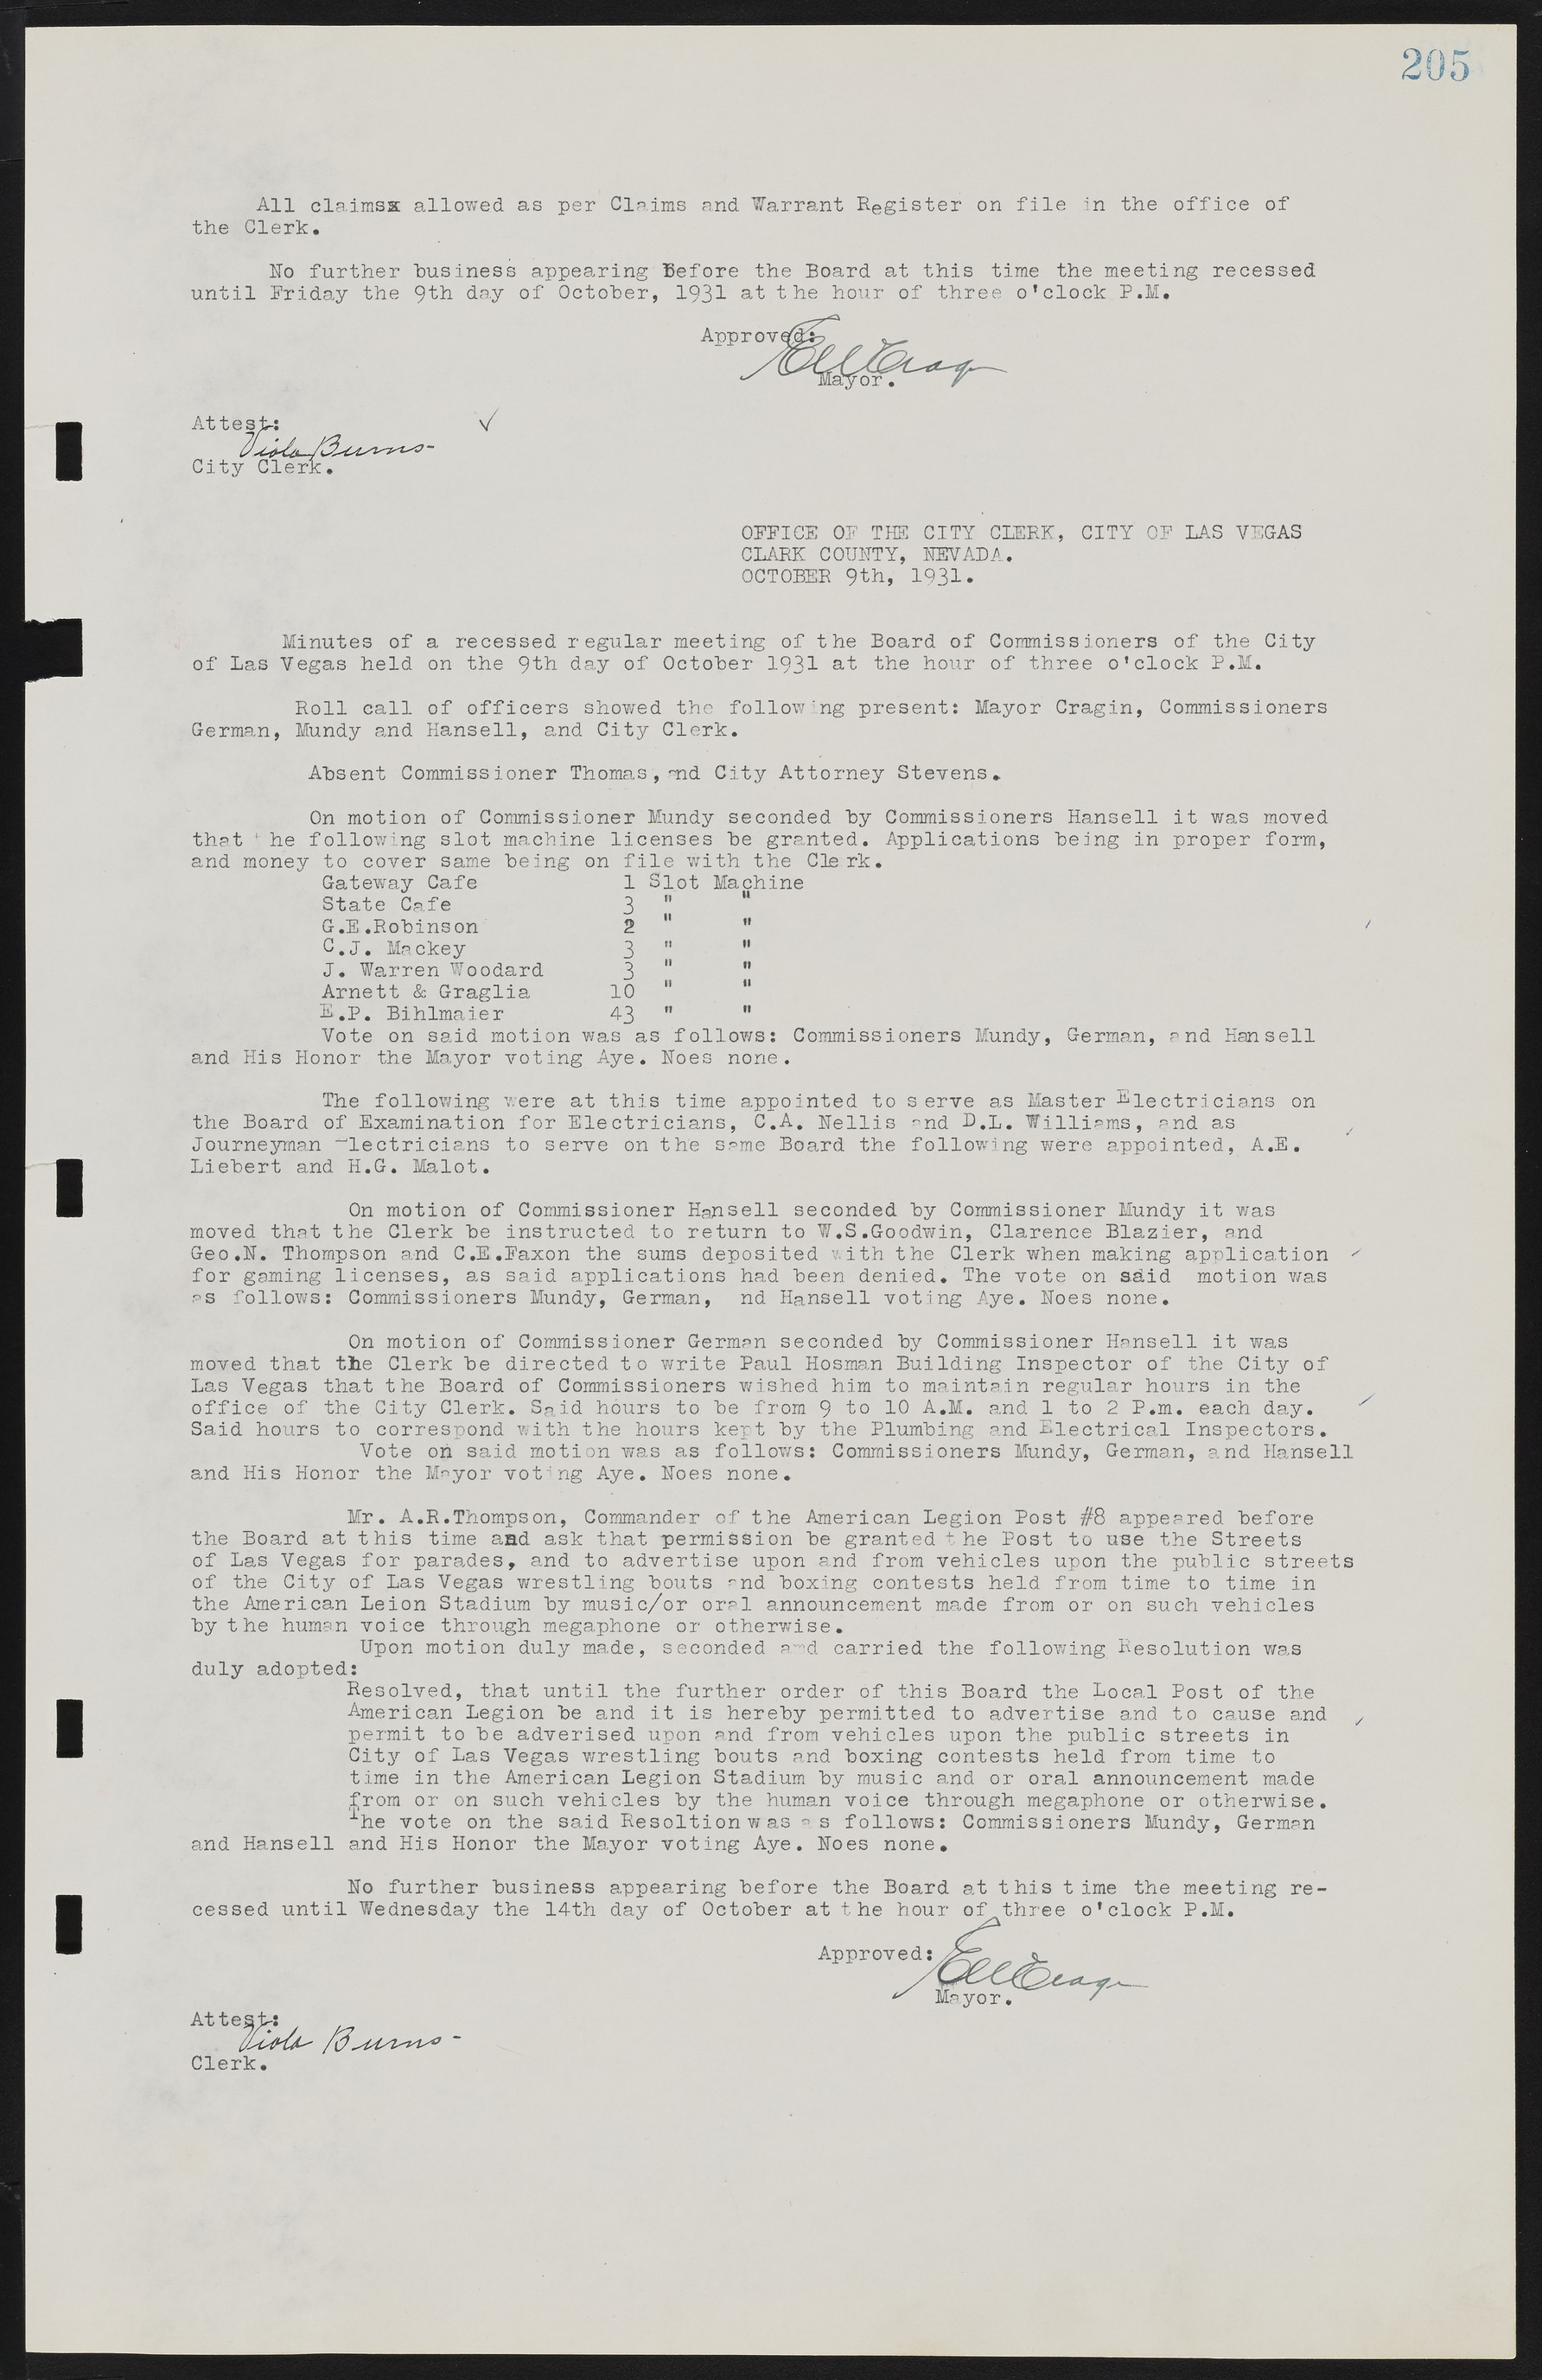 Las Vegas City Commission Minutes, May 14, 1929 to February 11, 1937, lvc000003-211